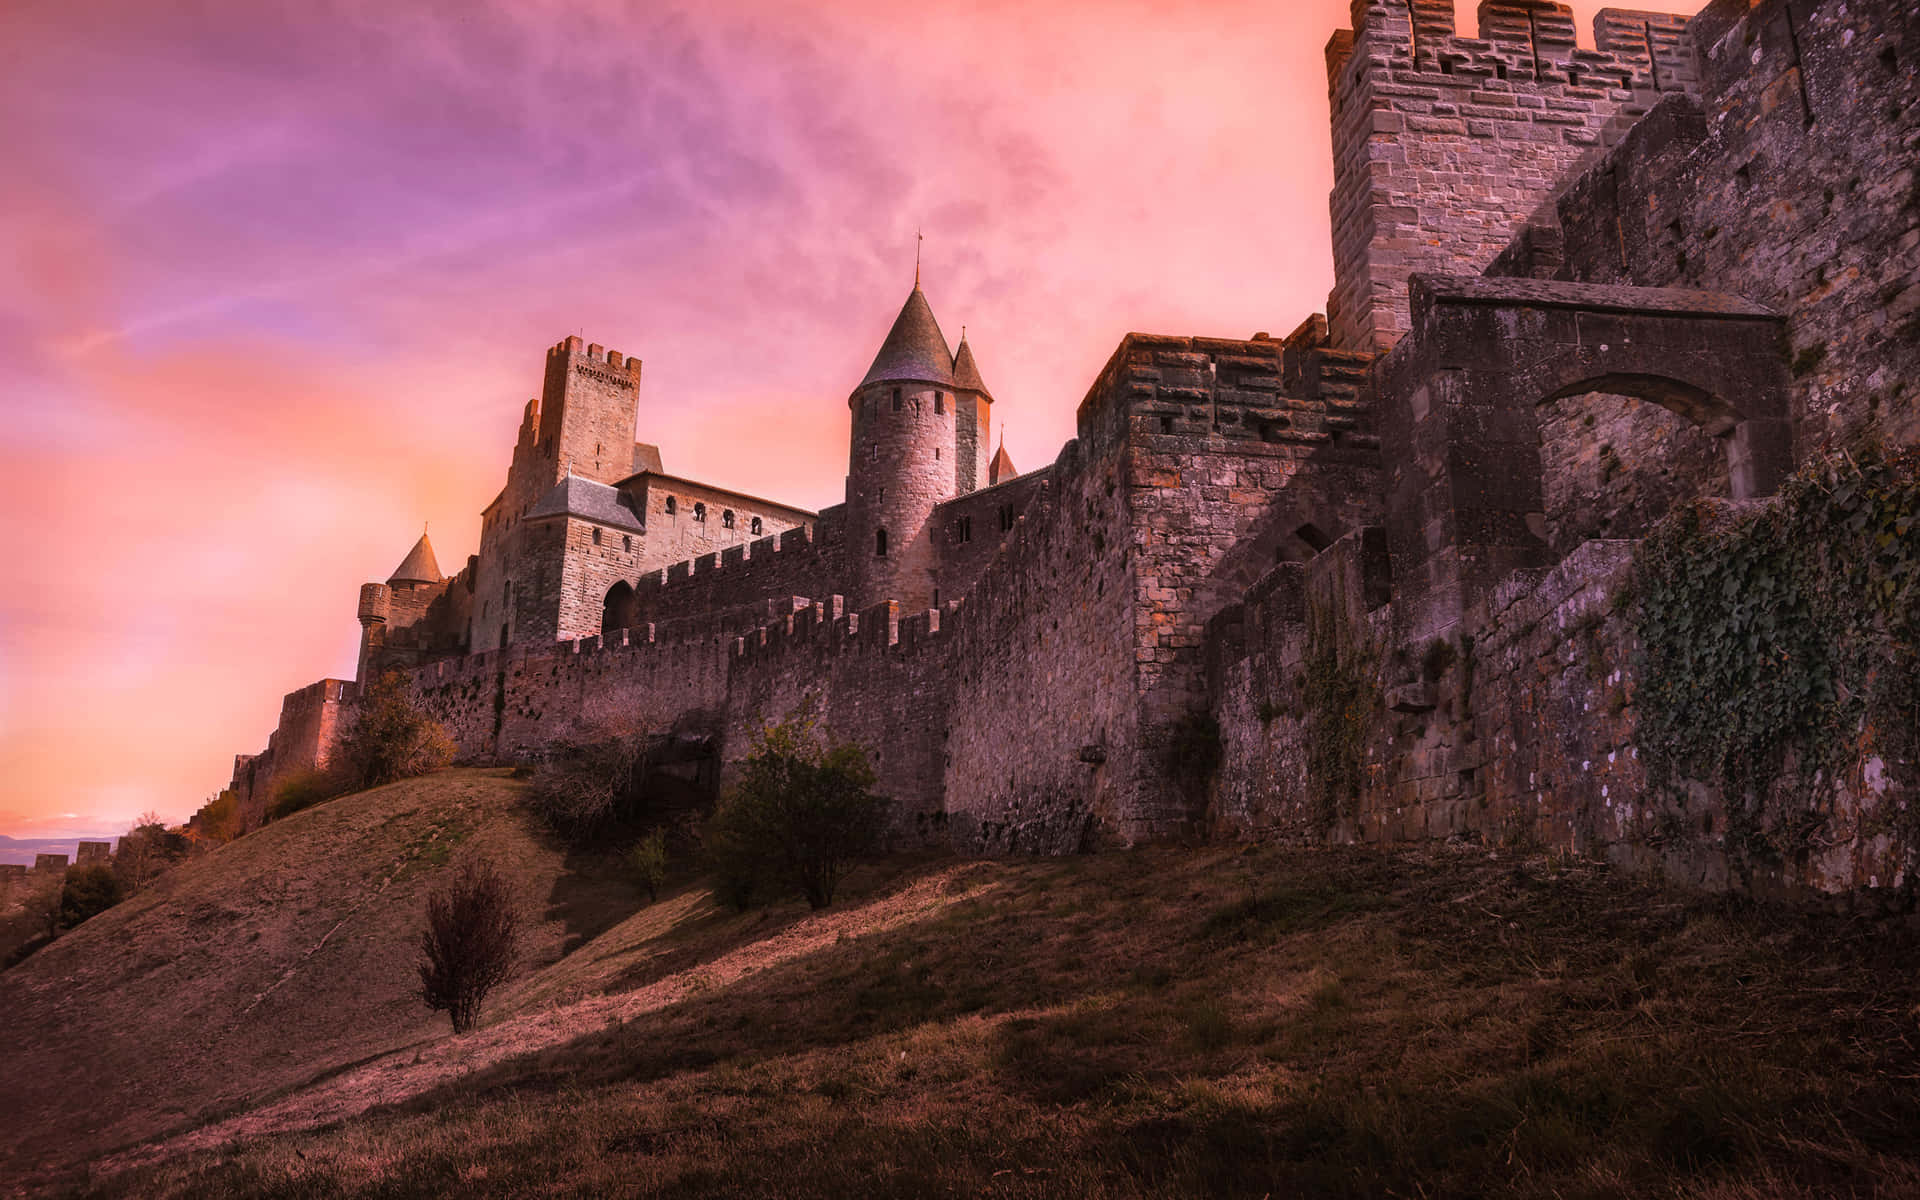 Cite De Carcassonne In France With Pink Sky Picture